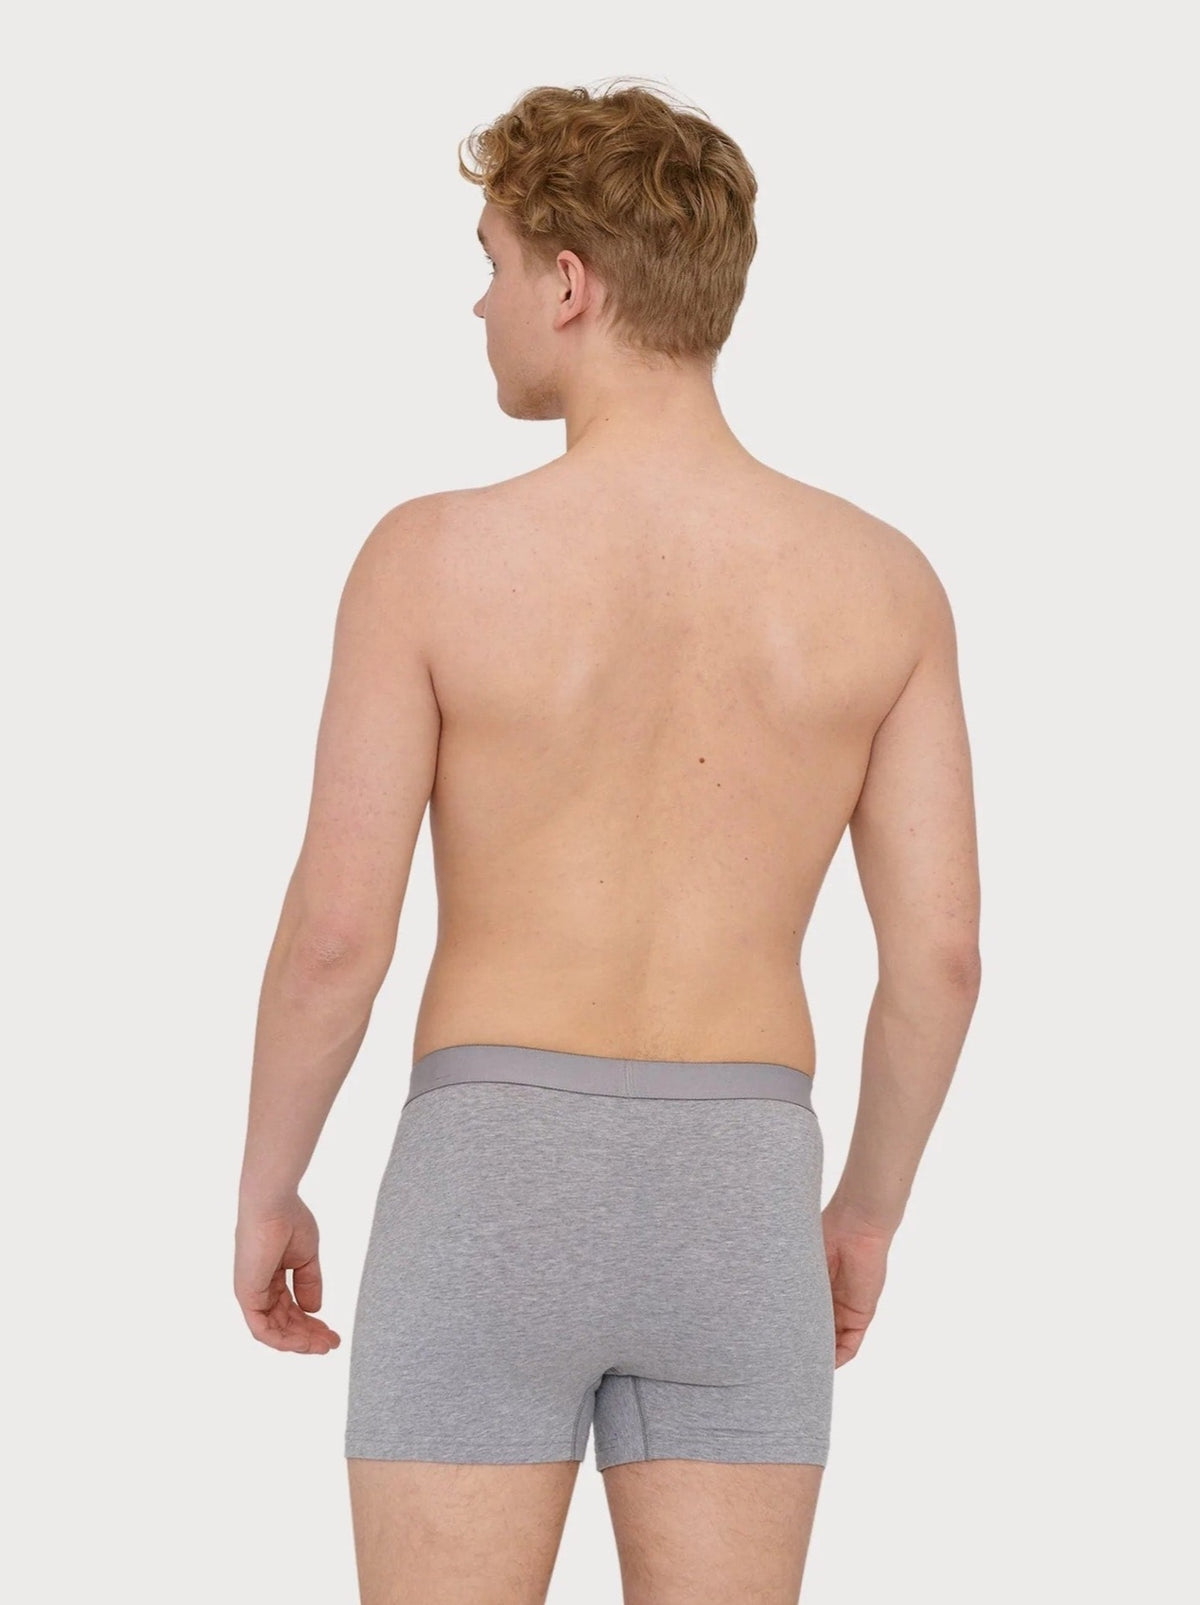 The back view of a man in Organic Basics&#39; Boxers - Organic Cotton (2-pack) - Grey Melange.